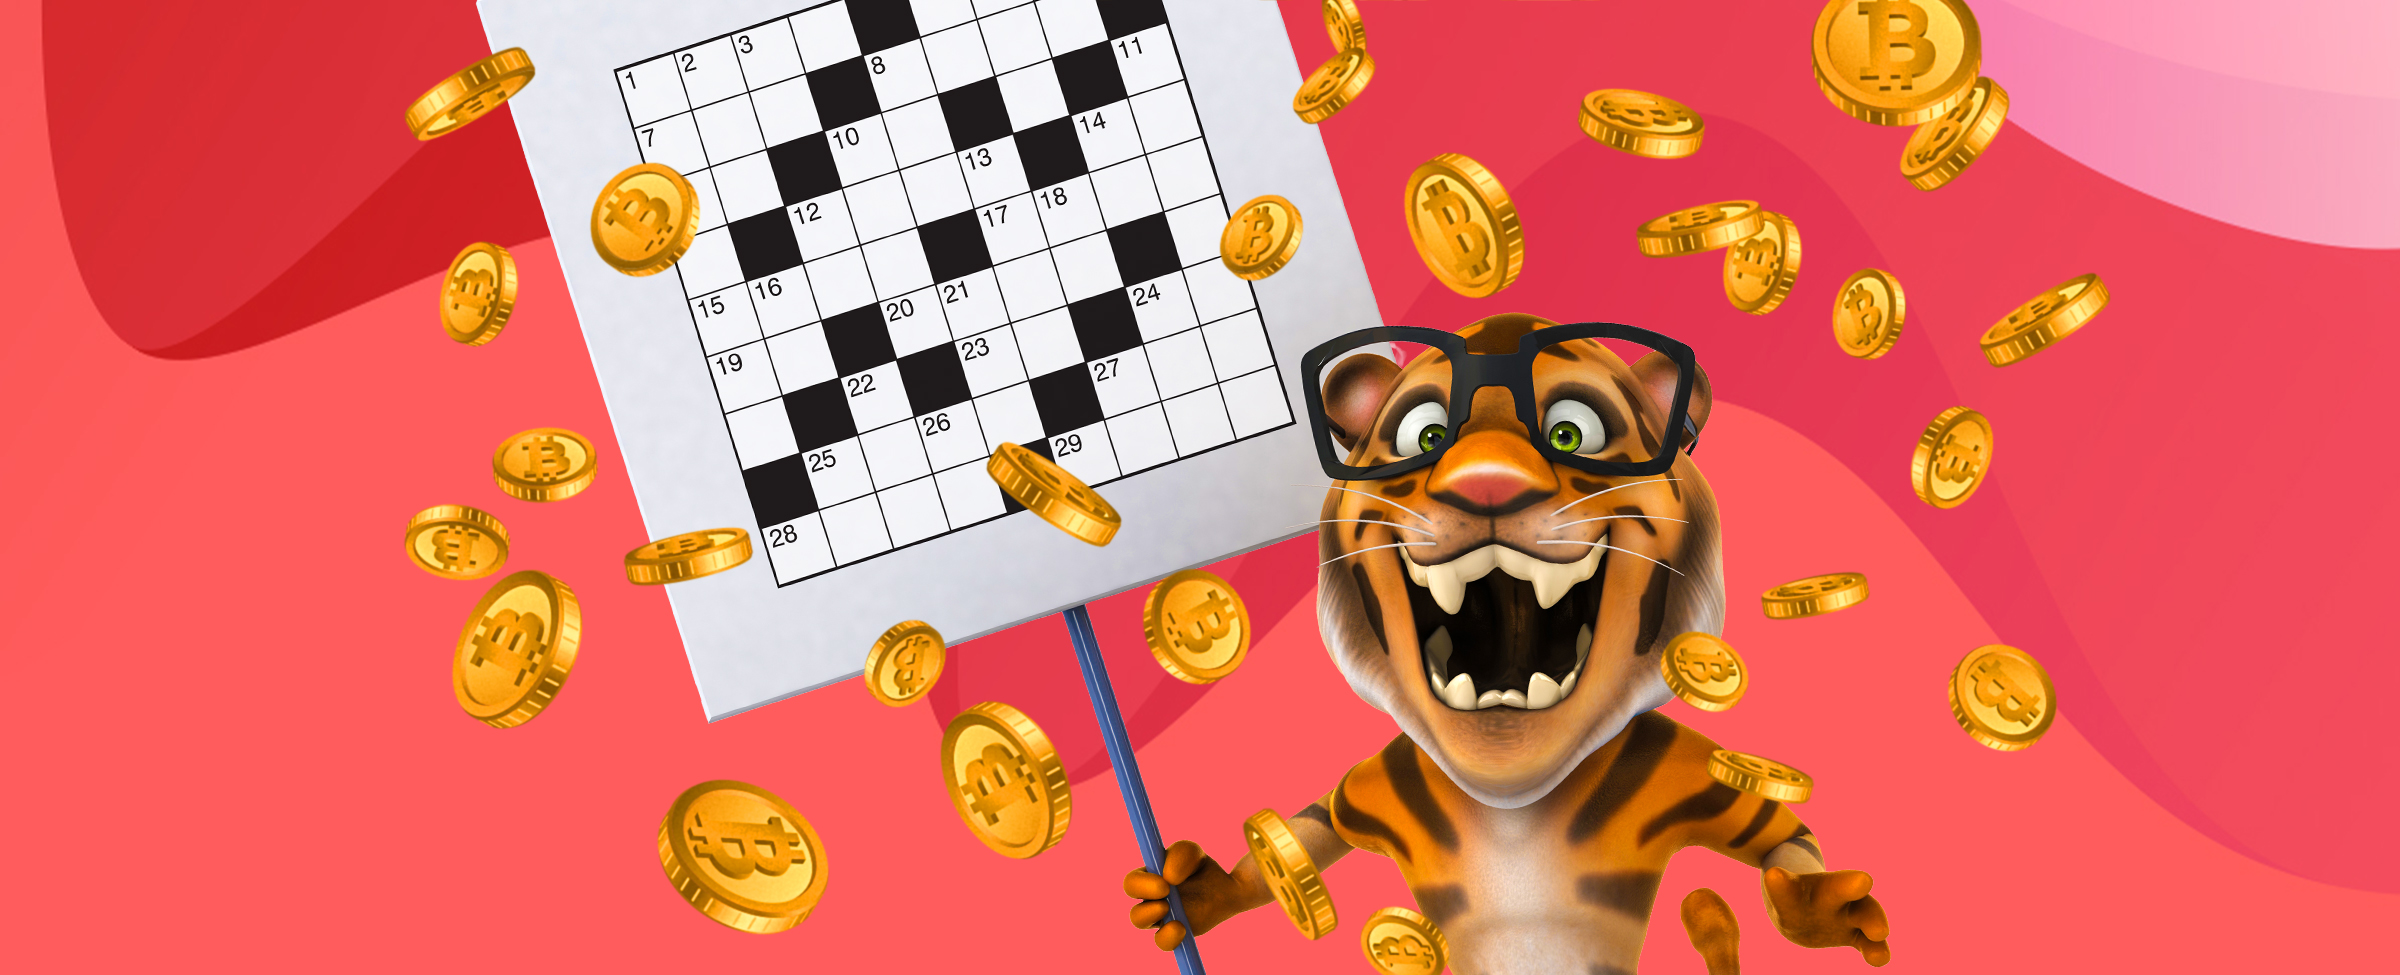 Tiger cartoon character wearing oversized glasses holding up a placard featuring a free crossword puzzle about crypto casinos for SlotsLV and surrounded by floating bitcoins